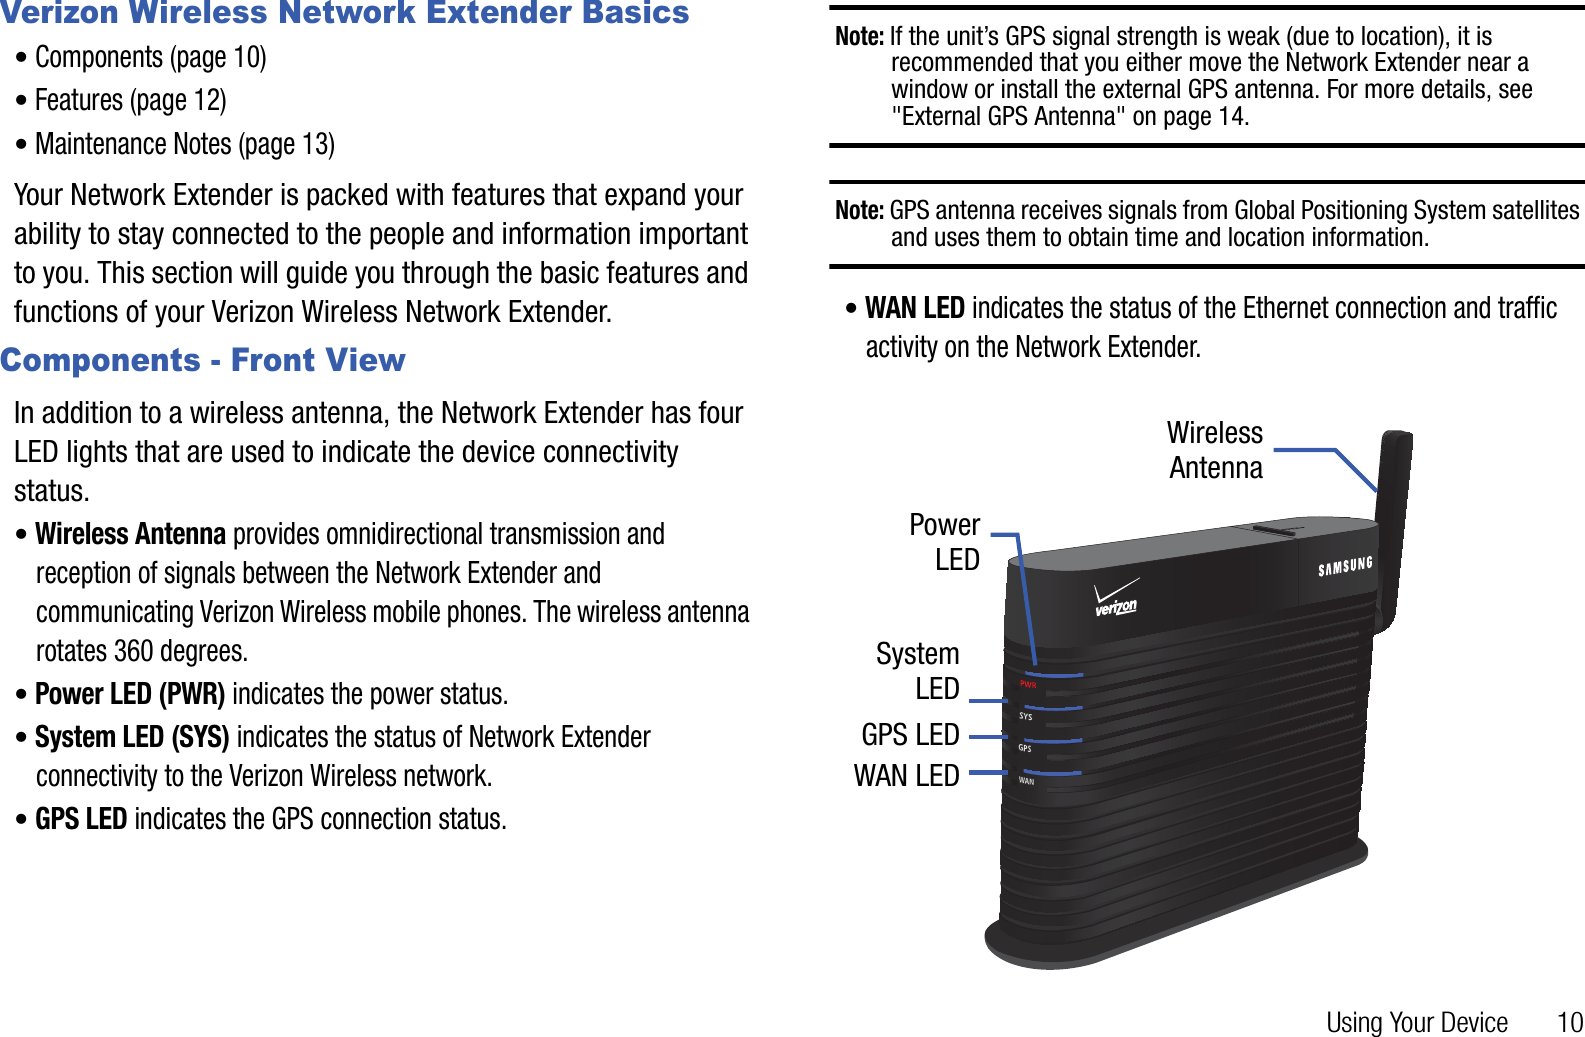 Using Your Device       10Verizon Wireless Network Extender Basics•Components (page 10)•Features (page 12)•Maintenance Notes (page 13)Your Network Extender is packed with features that expand your ability to stay connected to the people and information important to you. This section will guide you through the basic features and functions of your Verizon Wireless Network Extender.Components - Front ViewIn addition to a wireless antenna, the Network Extender has four LED lights that are used to indicate the device connectivity status.  •Wireless Antenna provides omnidirectional transmission and reception of signals between the Network Extender and communicating Verizon Wireless mobile phones. The wireless antenna rotates 360 degrees.•Power LED (PWR) indicates the power status.•System LED (SYS) indicates the status of Network Extender connectivity to the Verizon Wireless network.•GPS LED indicates the GPS connection status.Note: If the unit’s GPS signal strength is weak (due to location), it is recommended that you either move the Network Extender near a window or install the external GPS antenna. For more details, see &quot;External GPS Antenna&quot; on page 14.Note: GPS antenna receives signals from Global Positioning System satellites and uses them to obtain time and location information.•WAN LED indicates the status of the Ethernet connection and traffic activity on the Network Extender. PowerSystemGPS LEDWAN LEDWirelessAntennaLEDLED